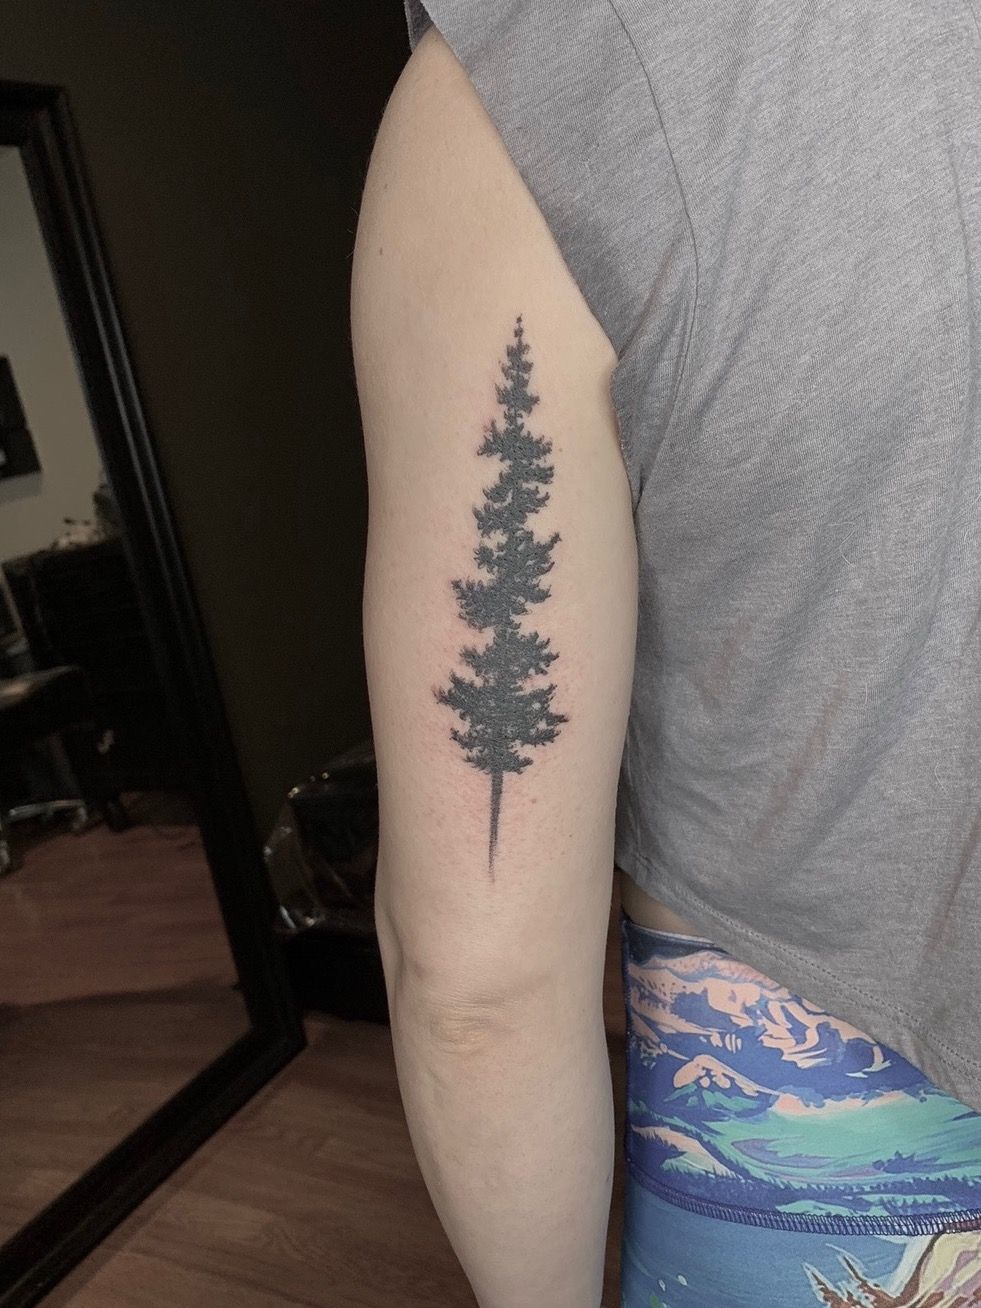 February 2020 and today. Little ankle pine tree. : r/agedtattoos